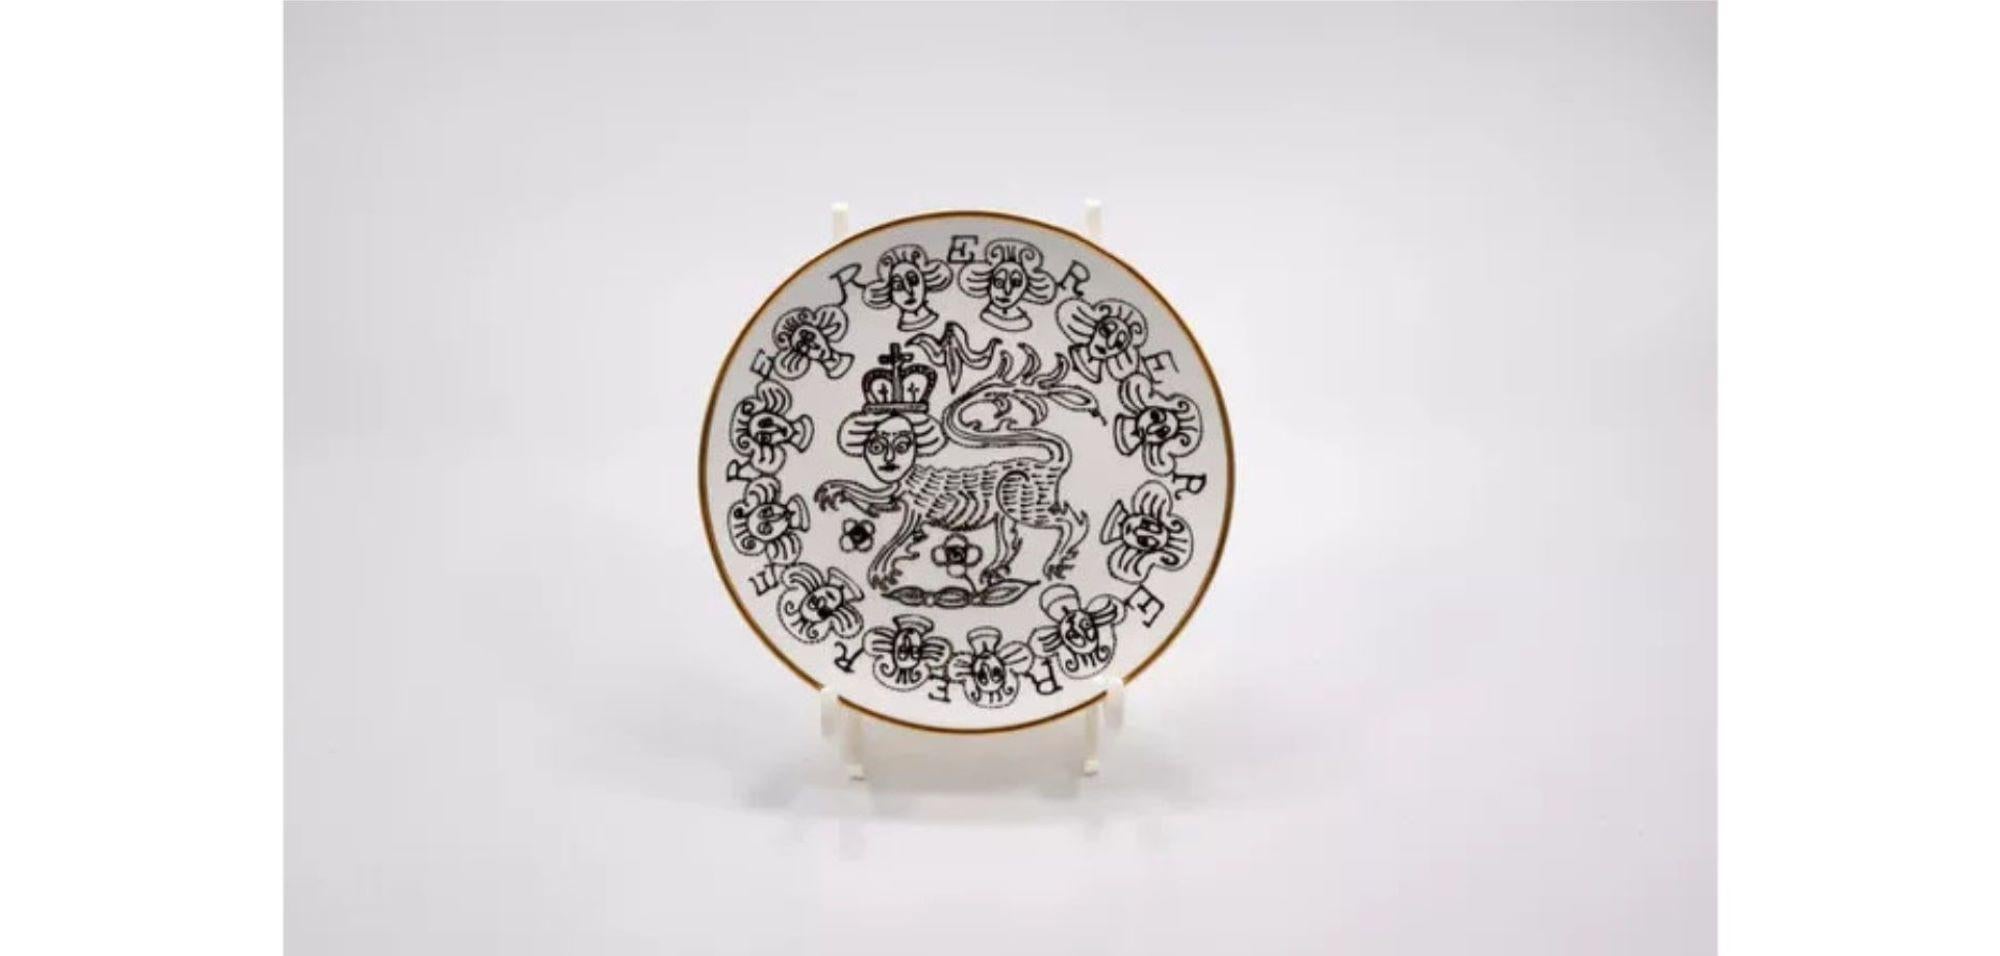 Lion Plate - Sculpture by Grayson Perry